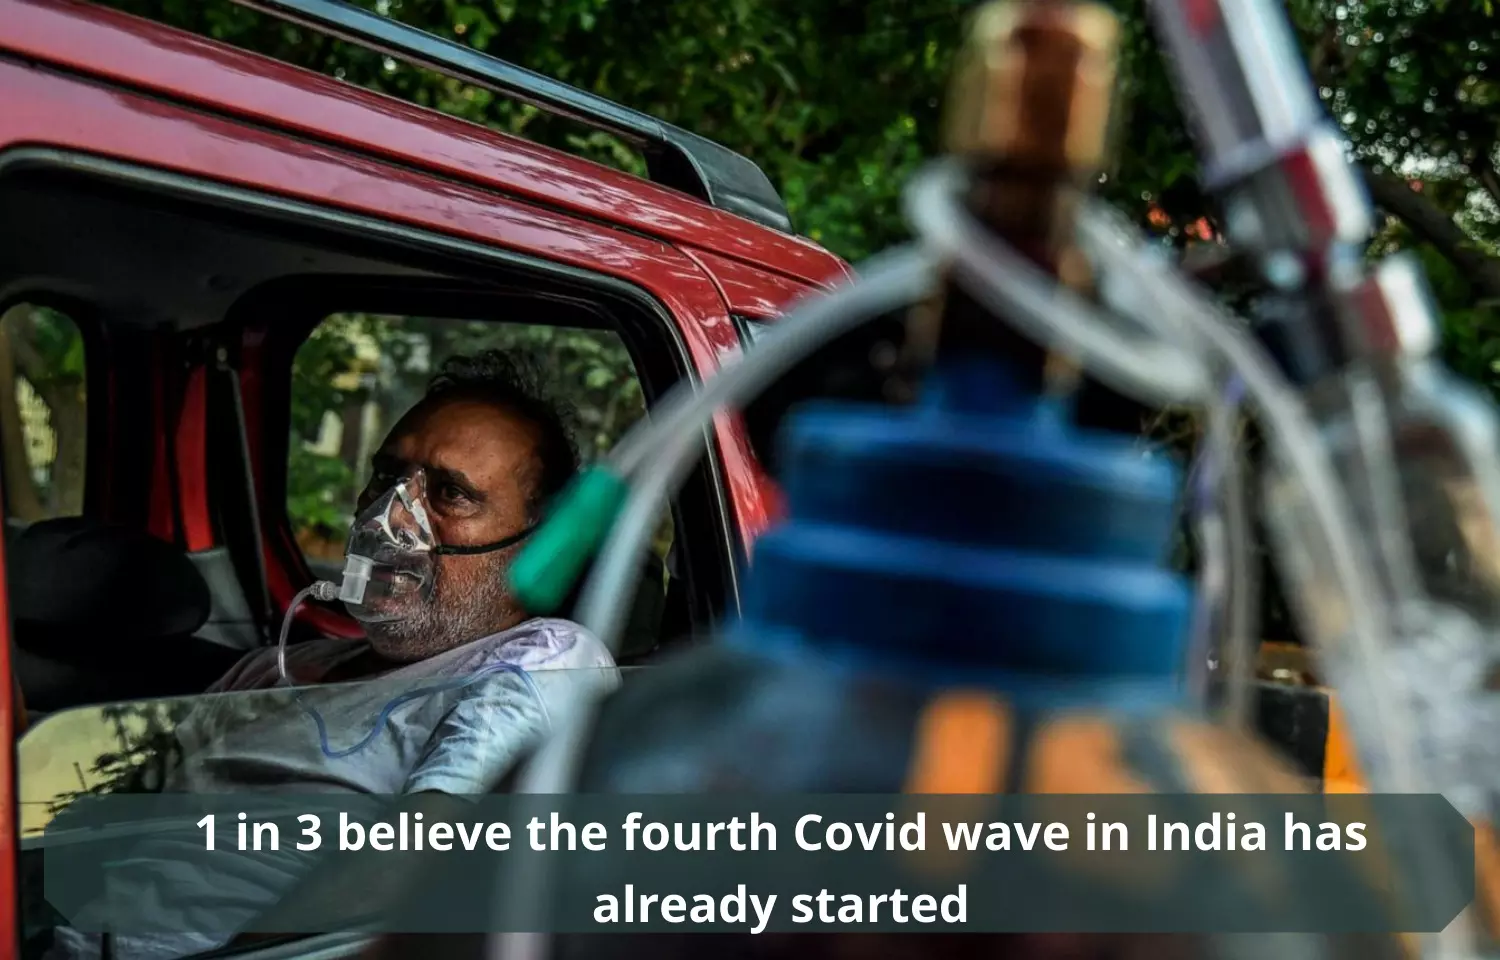 1 in 3 believe the fourth Covid wave in India has already started